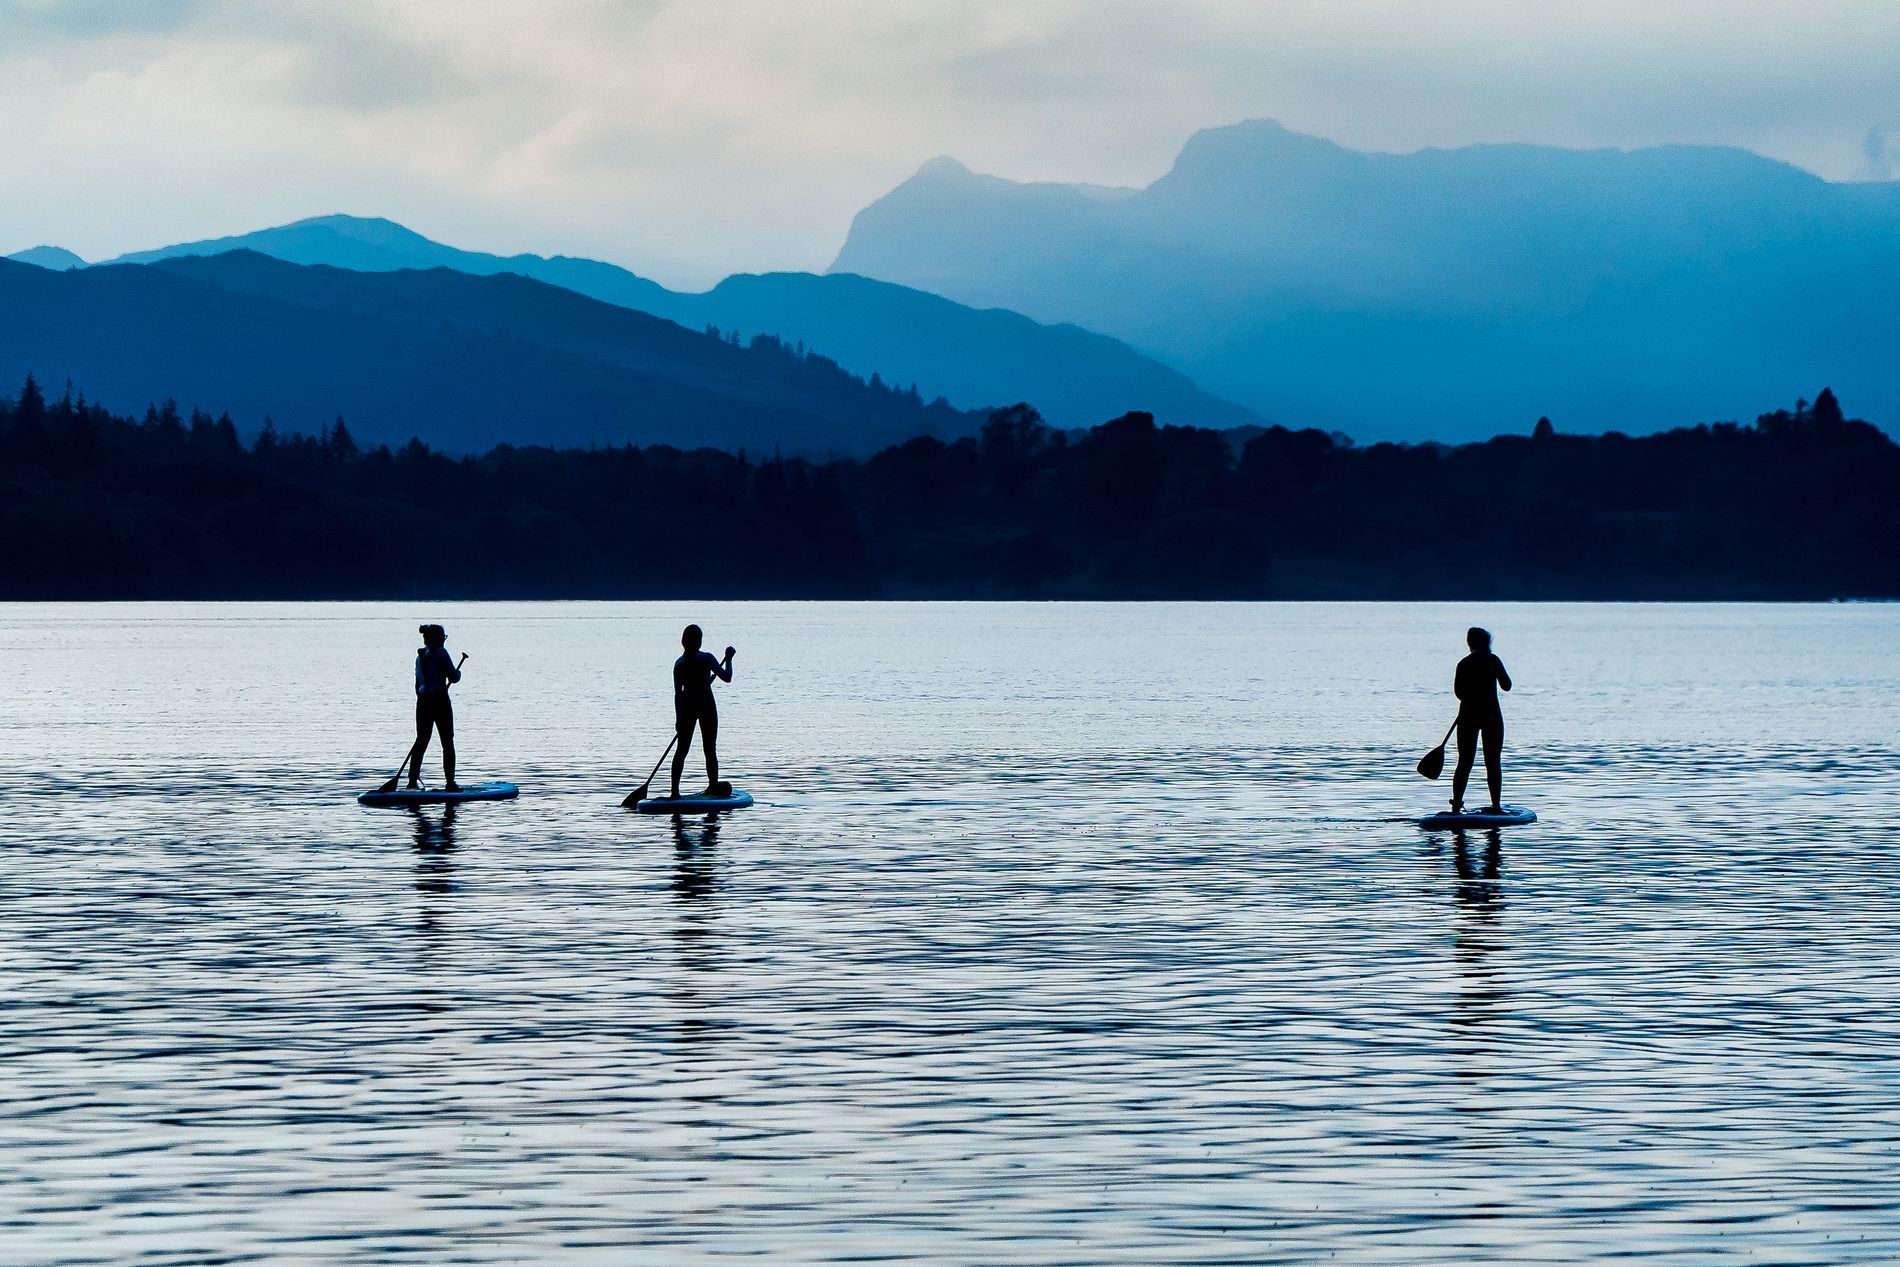 Paddle boarders at Windermere, Lake District by Kieron Vernon